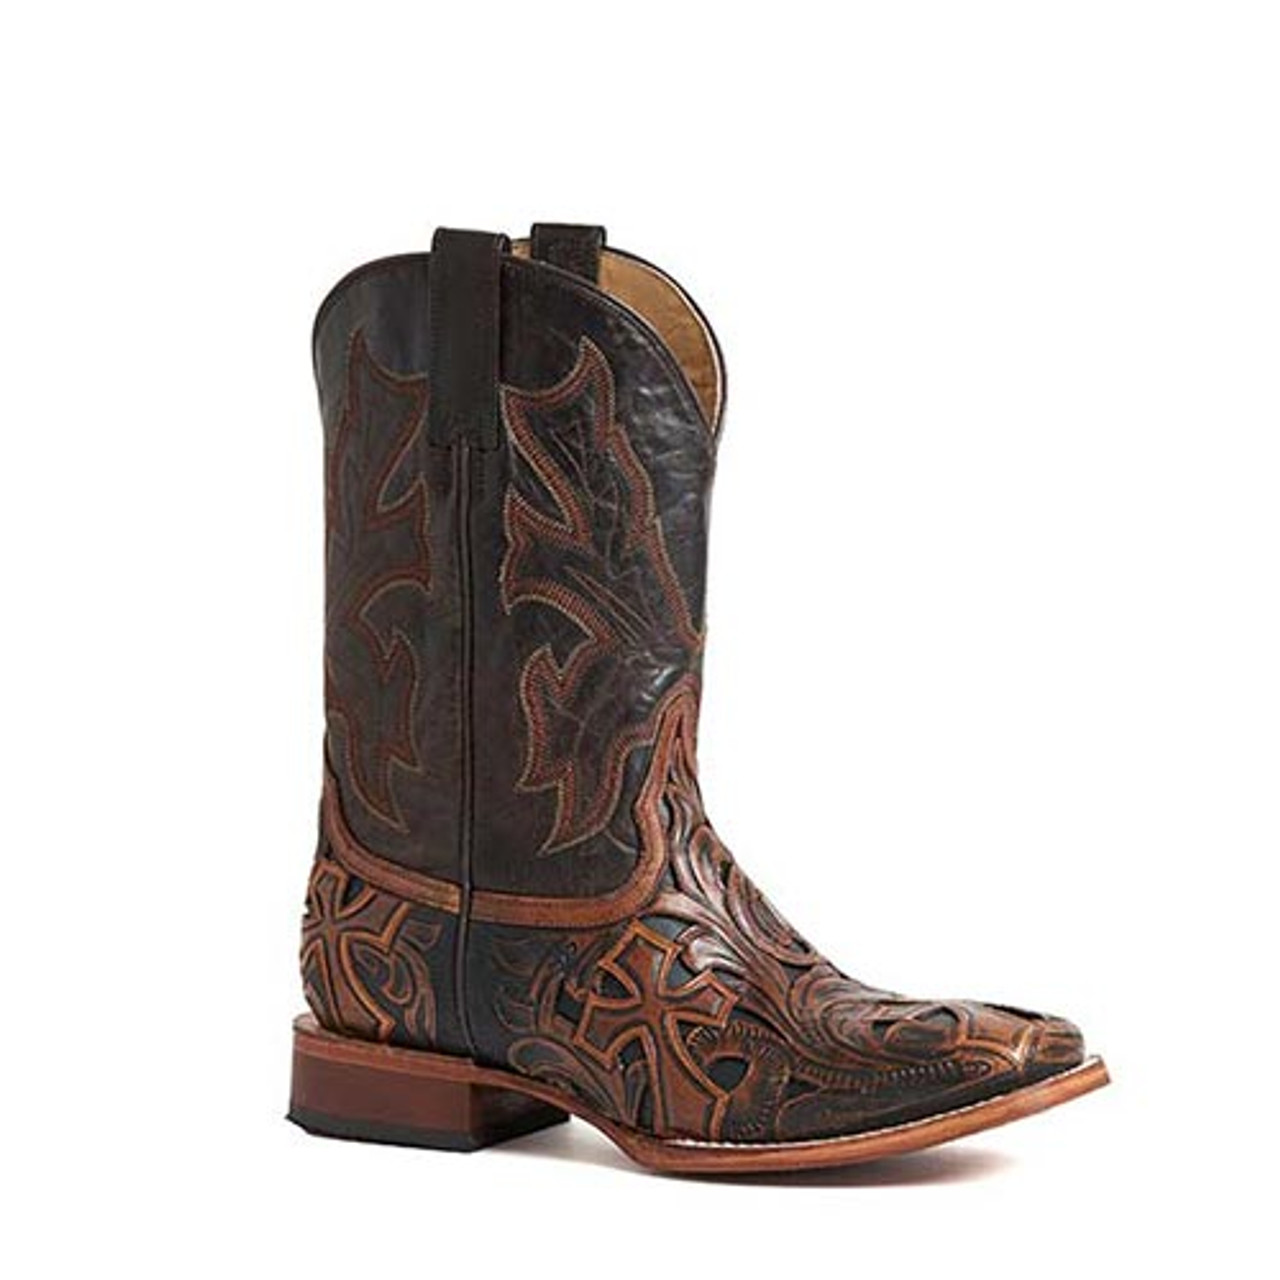 Stetson Men's Boots - Handtooled Cross - Burnished Black - Billy's ...